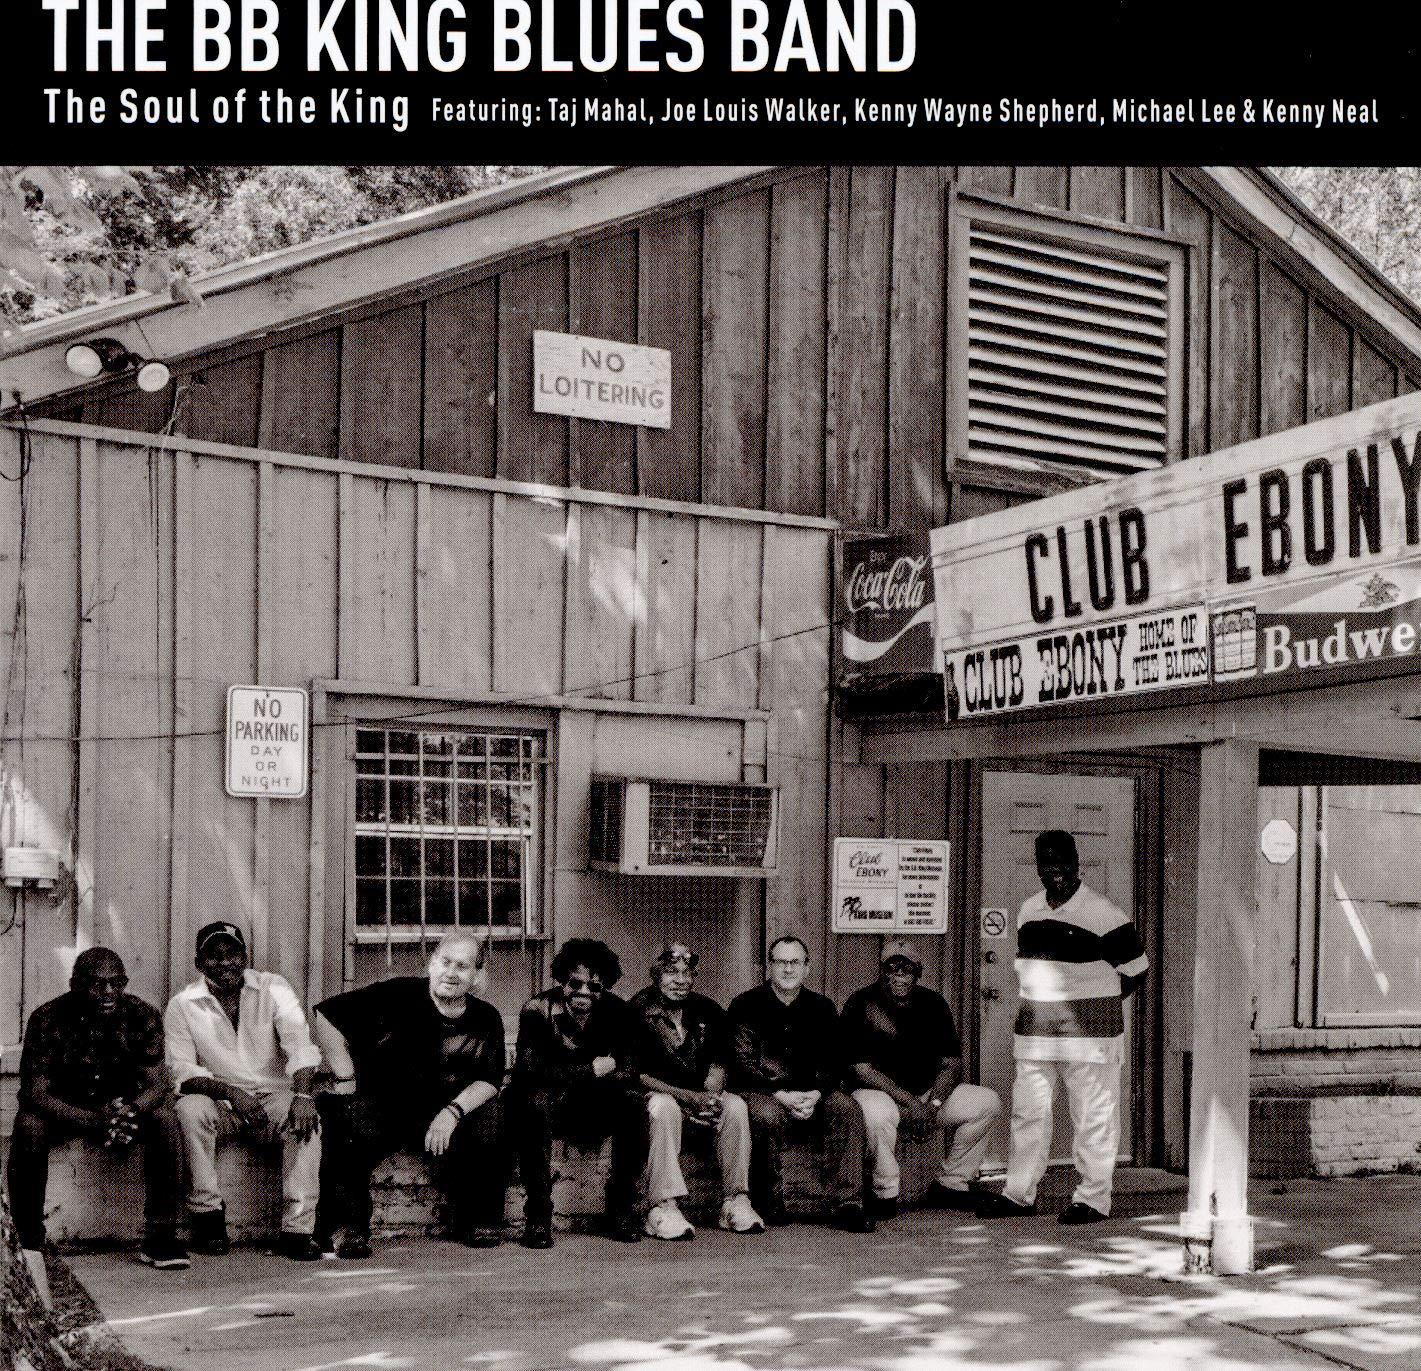 The BB King Blues Band